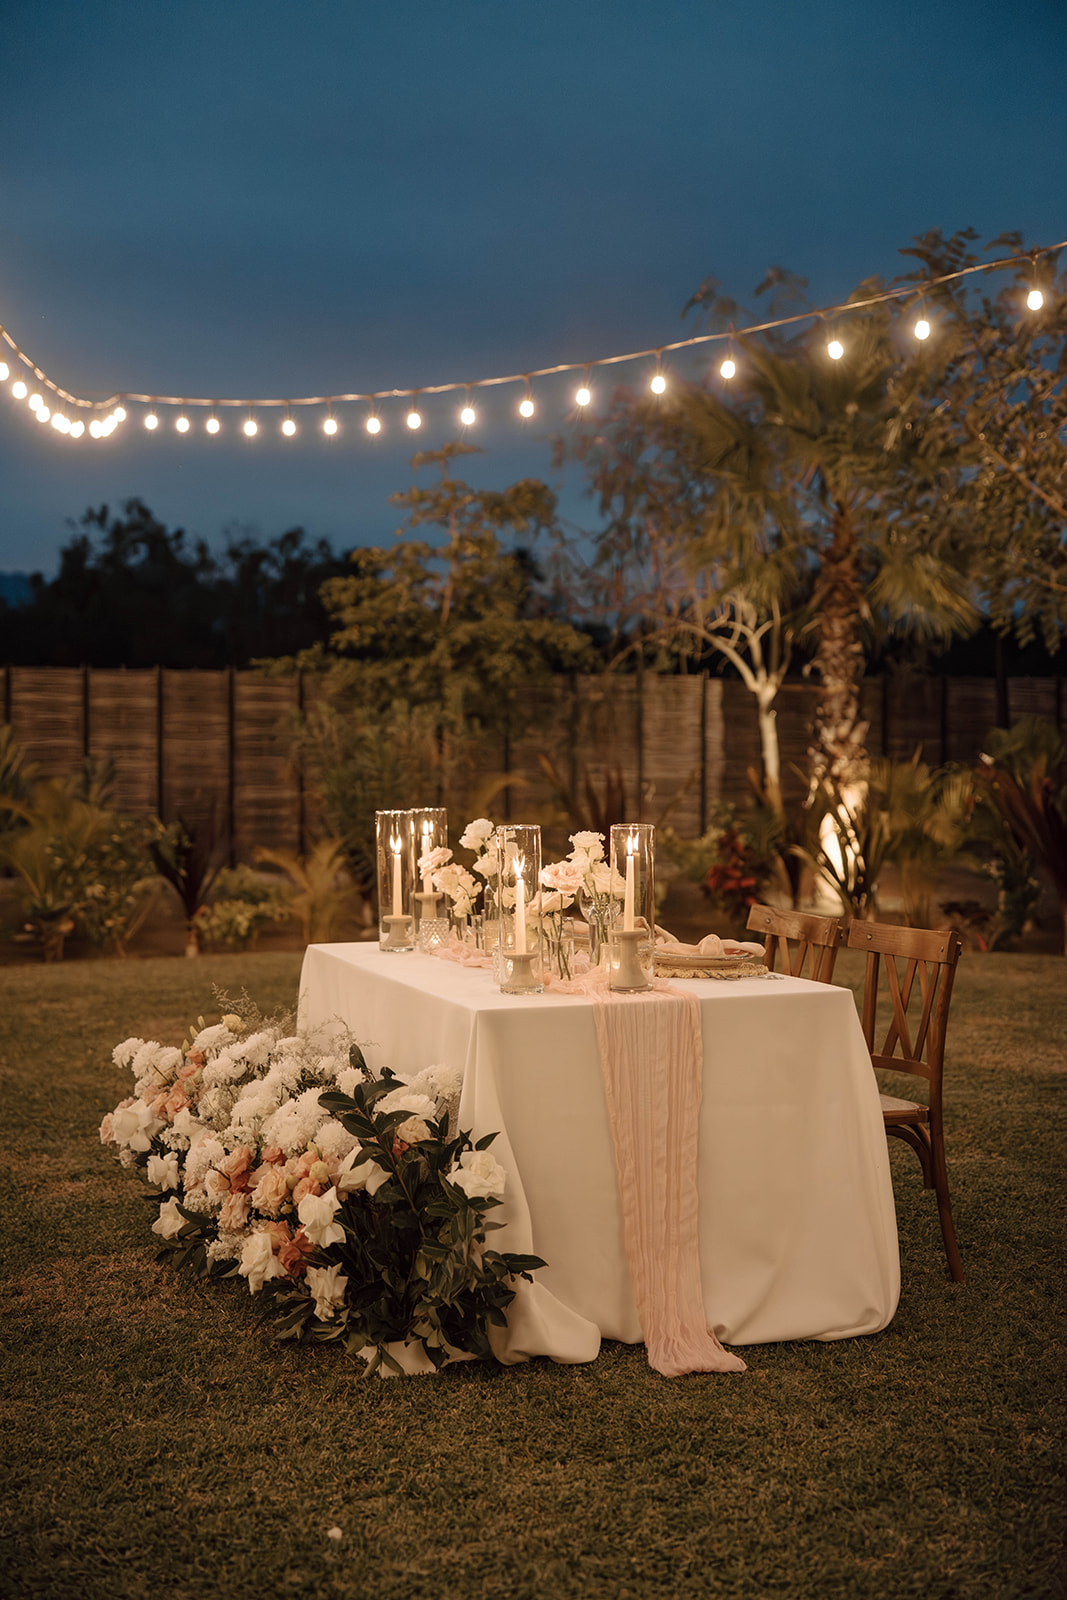 Elegant outdoor dining setup at dusk with string lights and floral decorations at a Cabo San Lucas Wedding